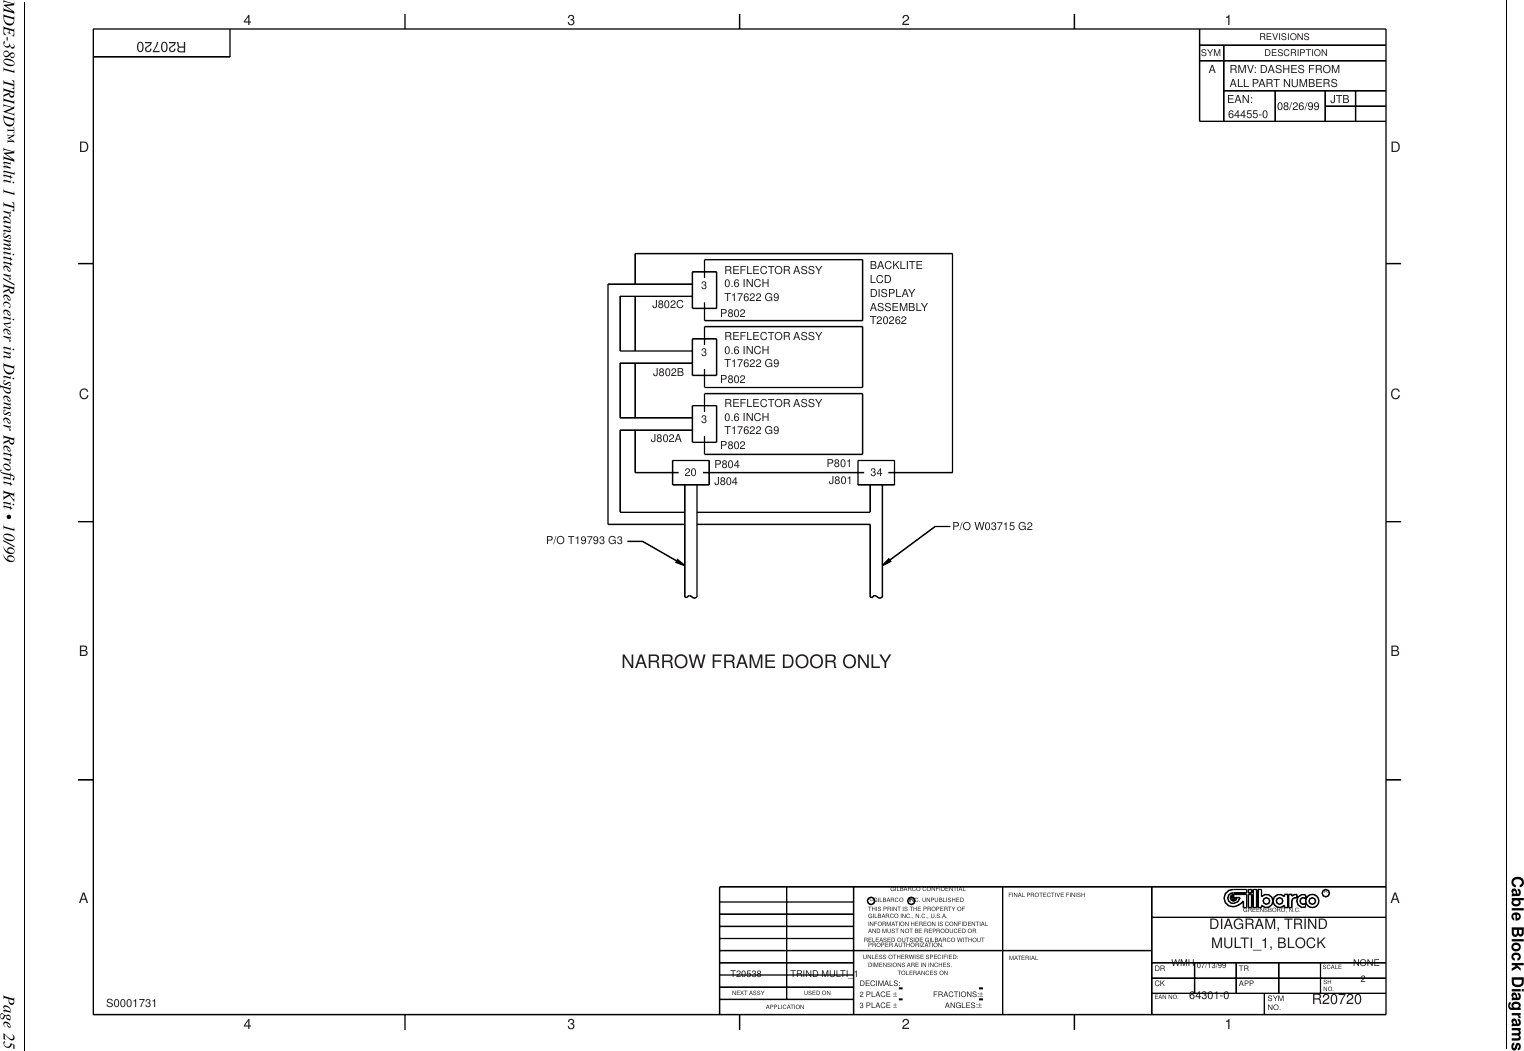 MDE-3801 TRIND™ Multi 1 Transmitter/Receiver in Dispenser Retrofit Kit • 10/99 Page 25Cable Block DiagramsRCRTRIND MULTI_1 WMH NONER20720R20720DIAGRAM, TRINDMULTI_1, BLOCK64301-007/13/99AJTB08/26/9964455-0EAN:RMV: DASHES FROMALL PART NUMBERST20538NARROW FRAME DOOR ONLY33P80220 34P801J804P804P802J802CJ802BJ802AJ8013P802BACKLITELCDDISPLAYASSEMBLYT20262REFLECTOR ASSY 0.6 INCH T17622 G9REFLECTOR ASSY 0.6 INCH T17622 G9REFLECTOR ASSY 0.6 INCH T17622 G9P/O W03715 G2P/O T19793 G32BACD43 21ABCD1234CK APPTRFRACTIONS:±ANGLES:±REVISIONSSYM DESCRIPTIONDR SCALESHNO.EAN NO. SYMNO.FINAL PROTECTIVE FINISHMATERIALUNLESS OTHERWISE SPECIFIED:DIMENSIONS ARE IN INCHES.TOLERANCES ONDECIMALS:2 PLACE ±3 PLACE ±NEXT ASSY USED ONAPPLICATIONGILBARCO CONFIDENTIAL  GILBARCO   INC. UNPUBLISHEDGREENSBORO, N.C.THIS PRINT IS THE PROPERTY OF GILBARCO INC., N.C., U.S.A.INFORMATION HEREON IS CONFIDENTIALAND MUST NOT BE REPRODUCED ORRELEASED OUTSIDE GILBARCO WITHOUTPROPER AUTHORIZATION.S0001731 ----